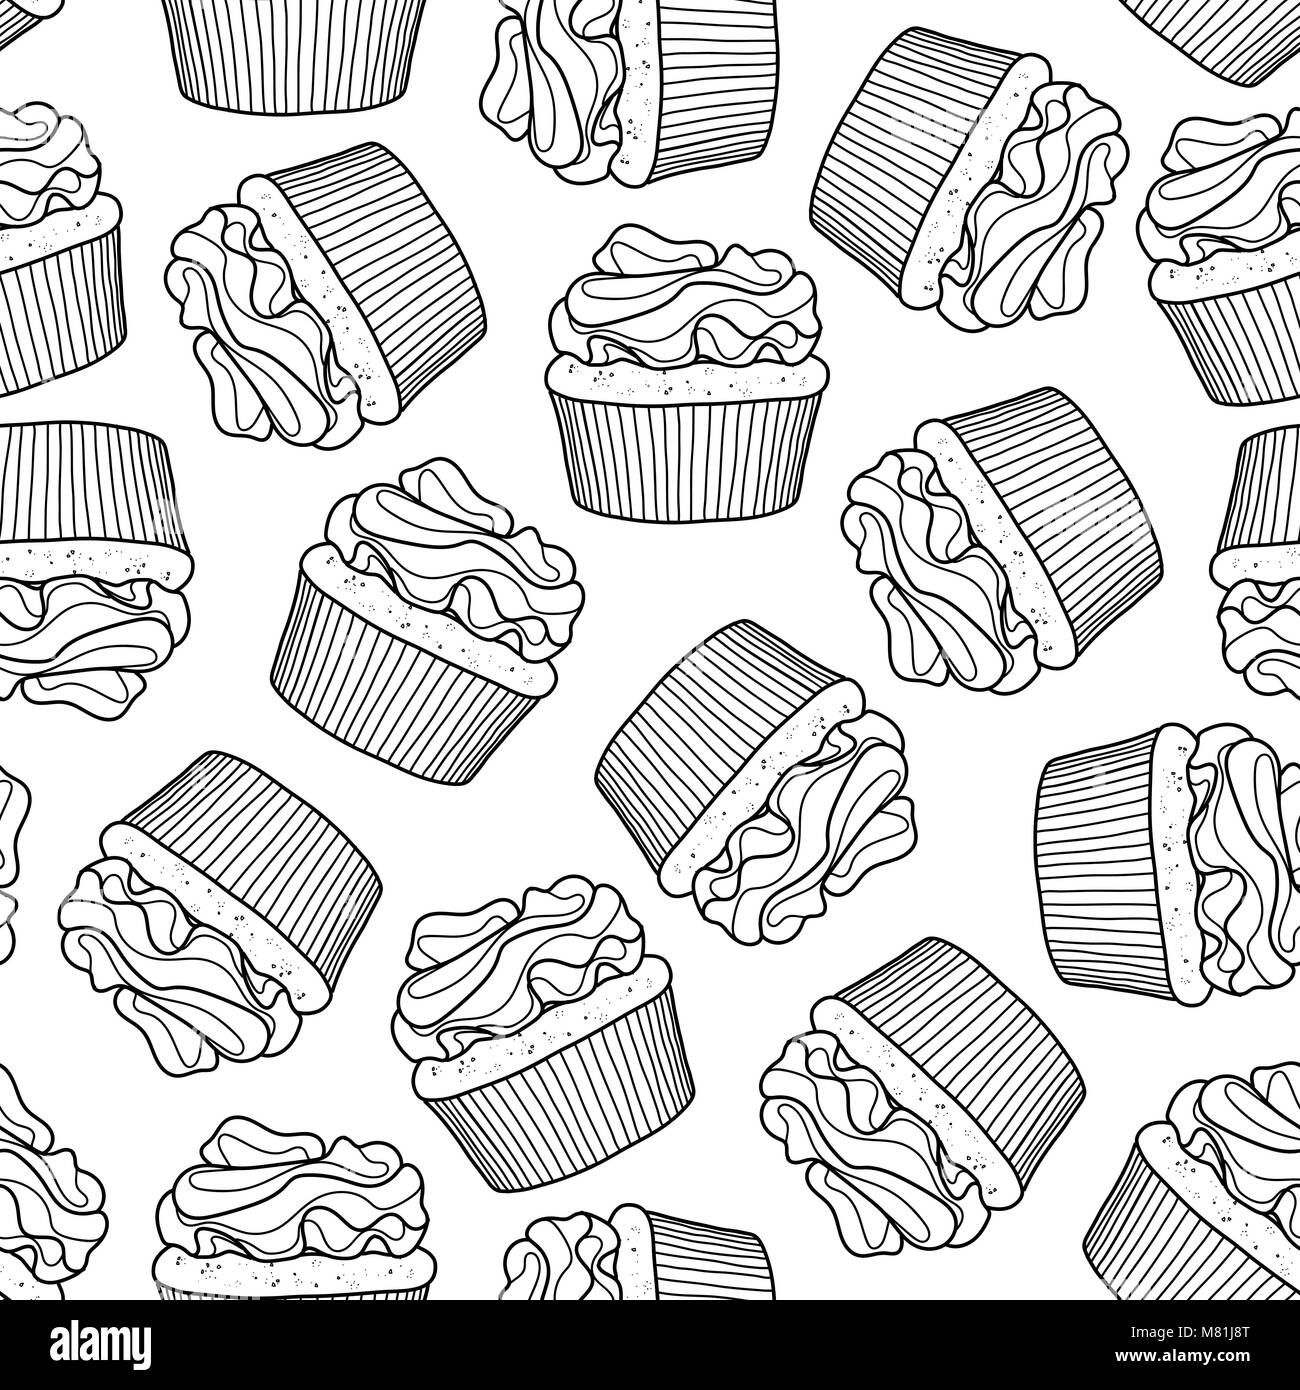 Cupcakes random on white background. Cute hand drawn seamless pattern of dessert in black outline style. Stock Vector